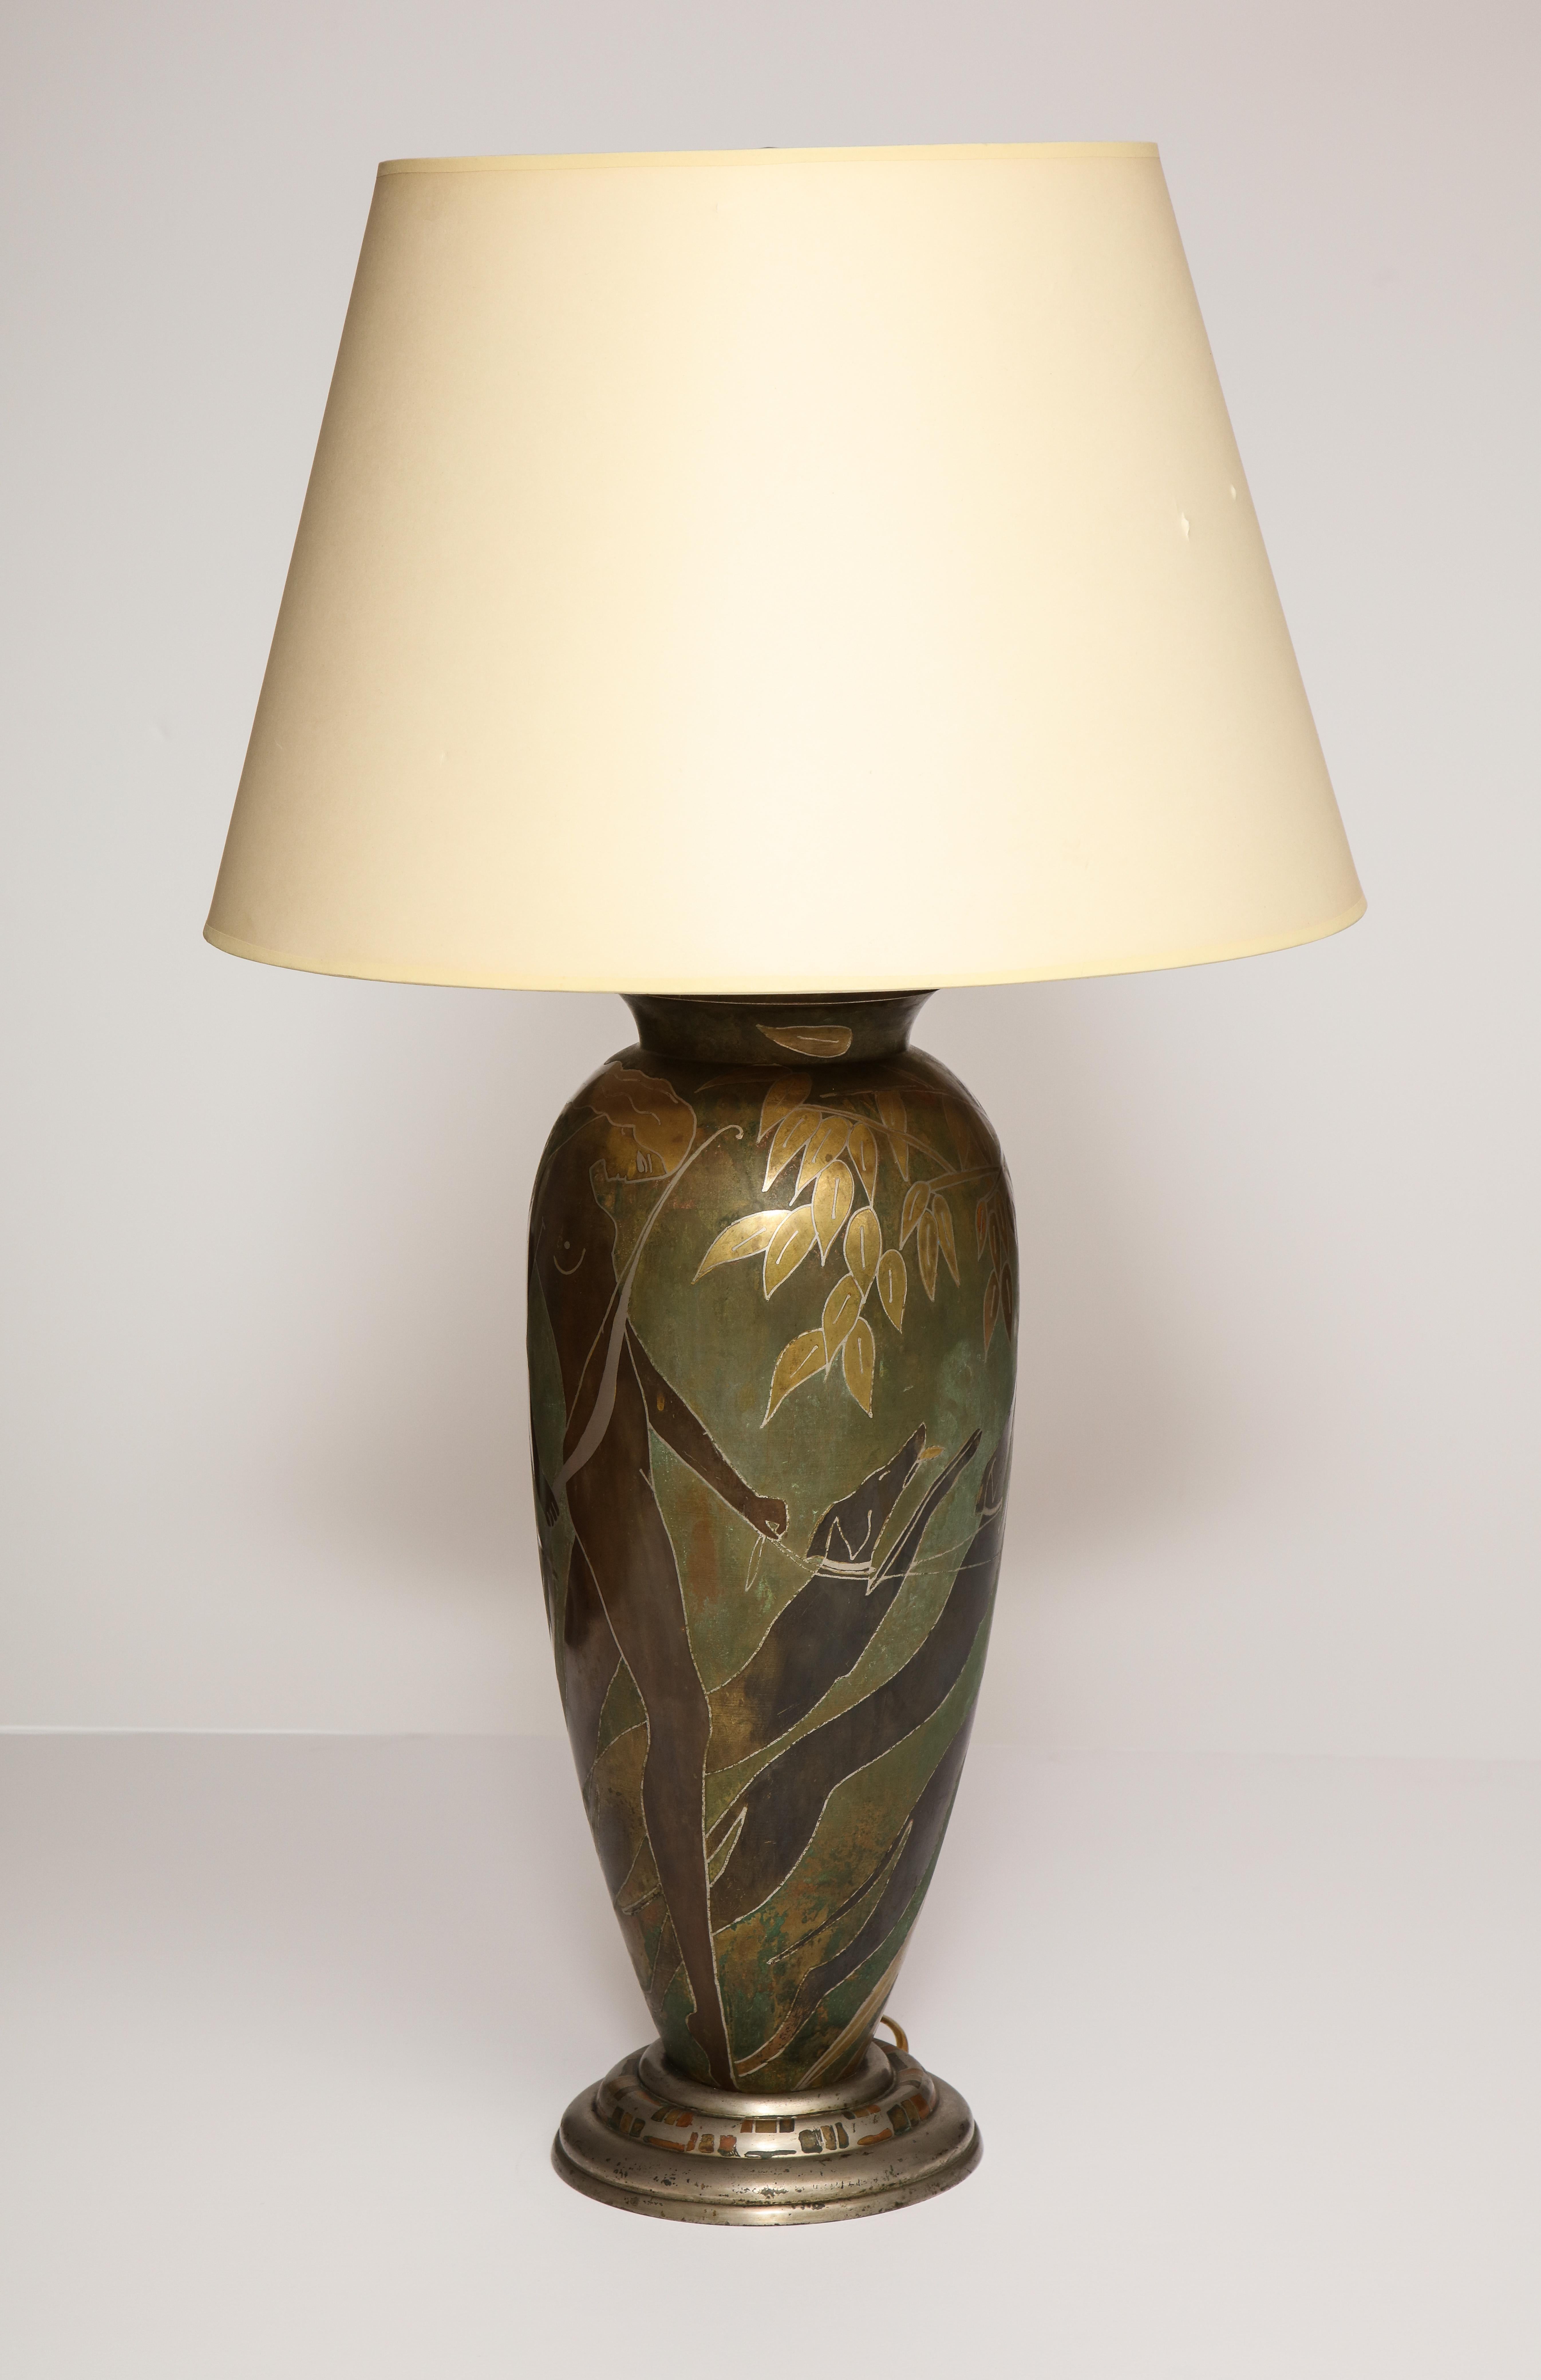 French Art Deco Dinanderie table lamp. The assorted metals and patina depicting Diana. Having original hardware, rewired recently. Signed M. Poincet.
 